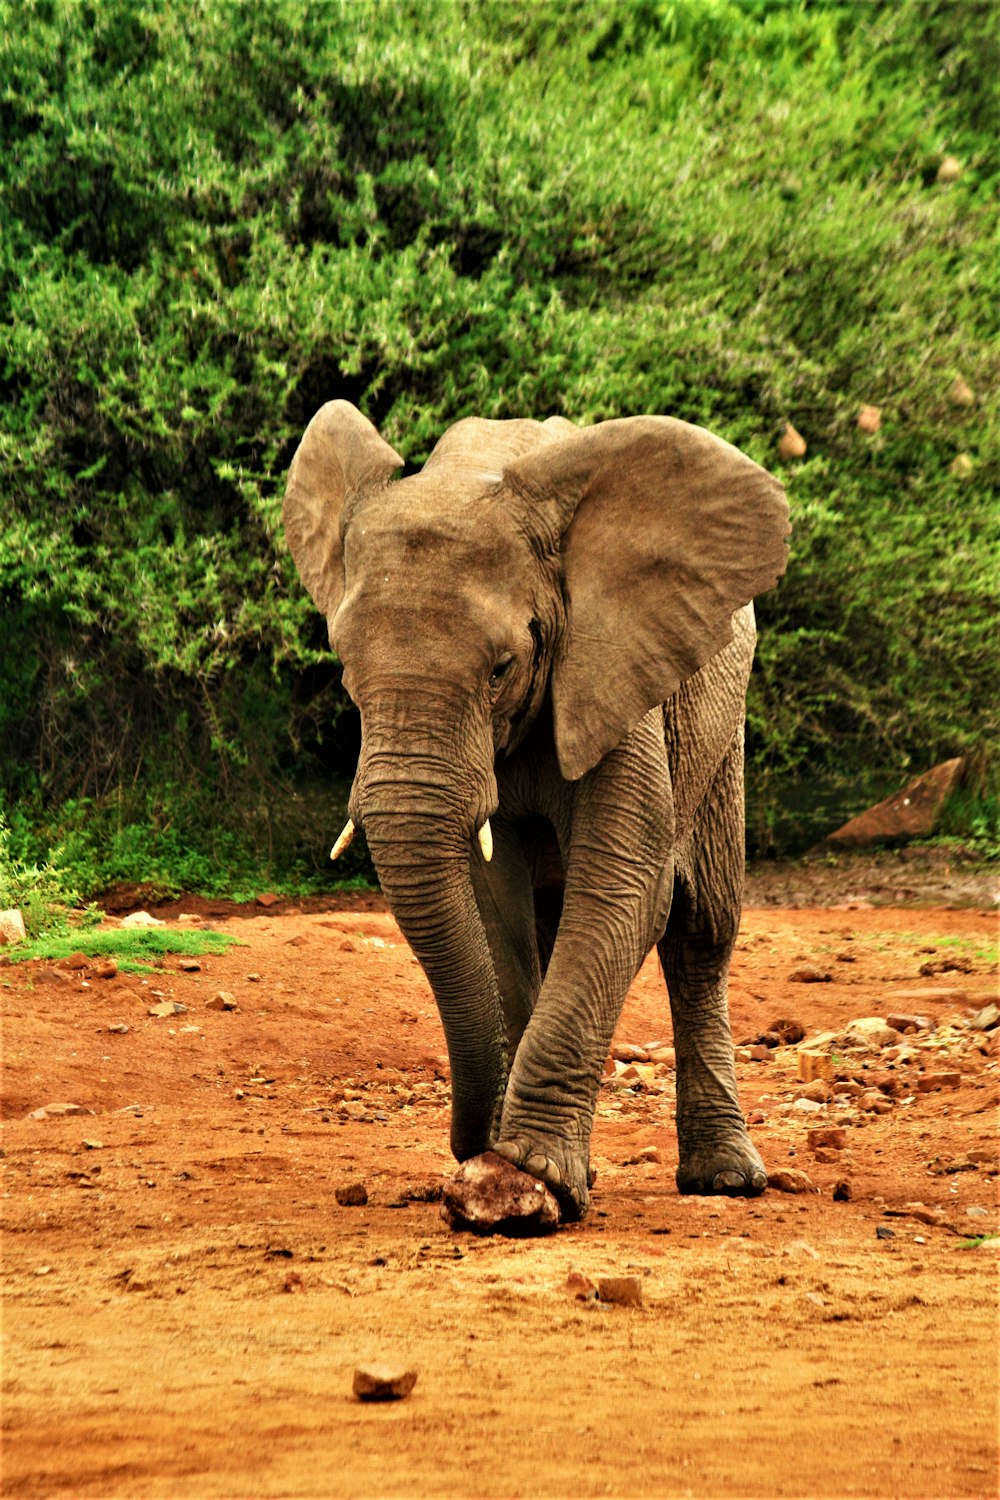 an elephant walking across a dirt field with trees in the background